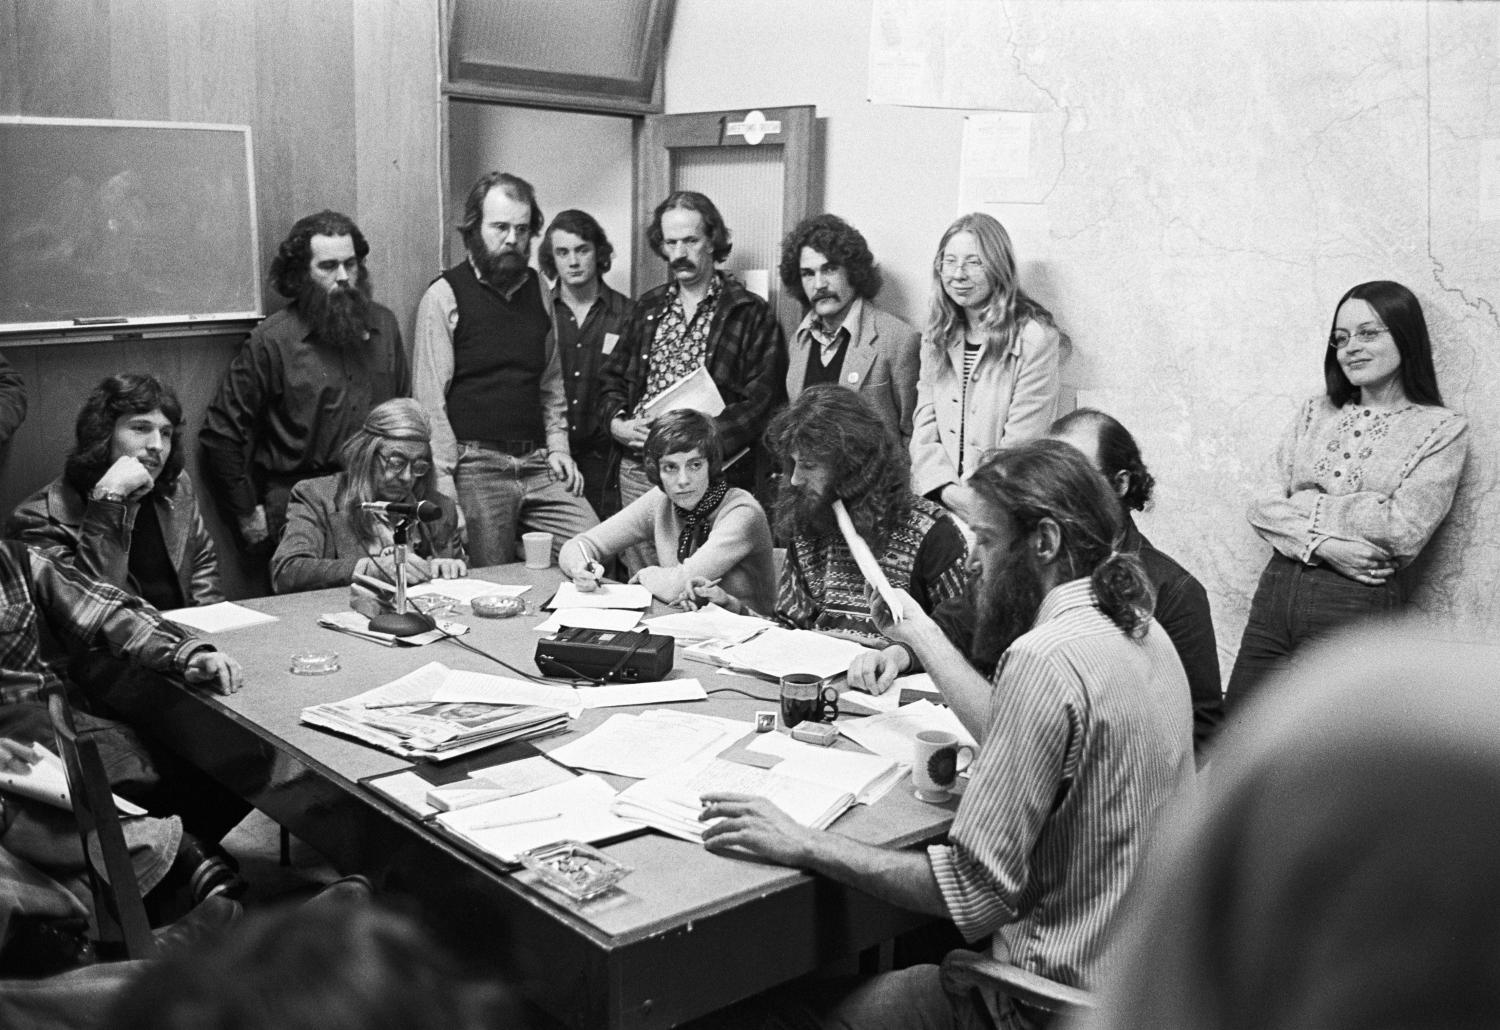 The first public Greenpeace office at 2007 West 4th Avenue in Vancouver, B.C., Canada. Bob Hunter sits at the head of the table, Bree Drummond leans against the wall, Rod Marining, with long red hair and beard sits next to Hunter’s right, Alan Clapp stands in the doorway with a file folder, and Henry Payne sits at the far end of the table with a headband.